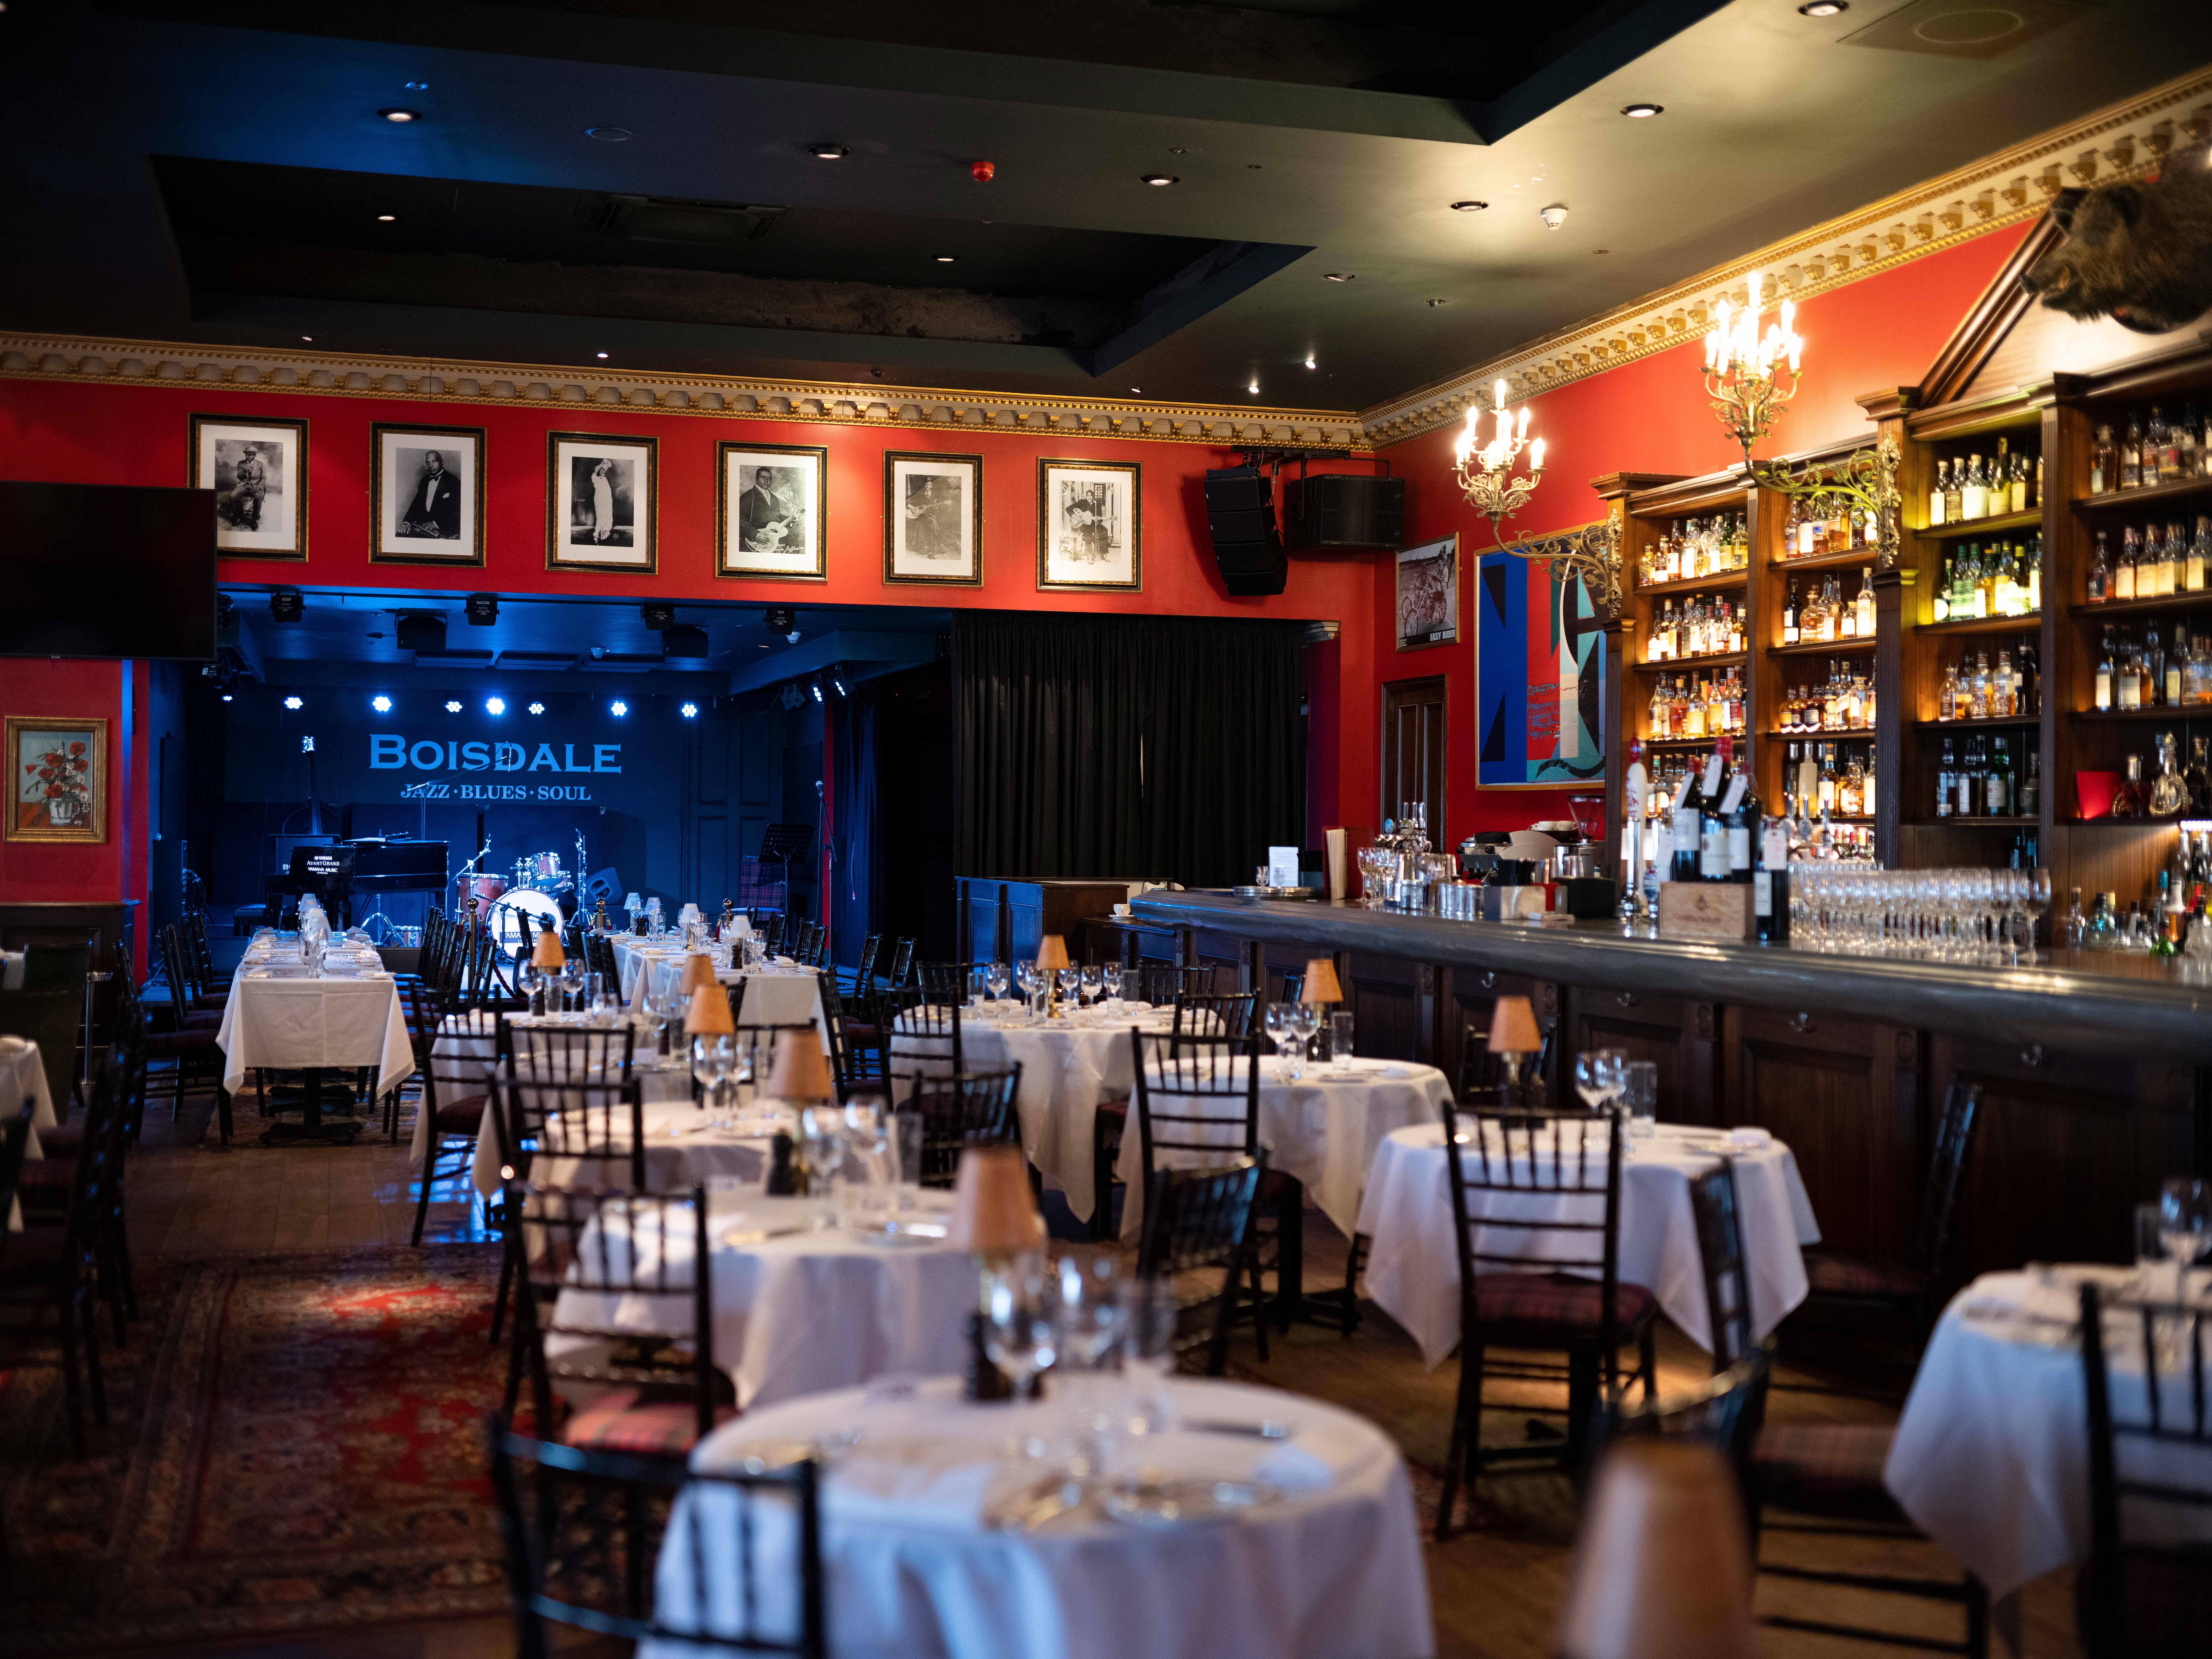 New NEXO installation delivers a sophisticated audience experience at Boisdale live music restaurant